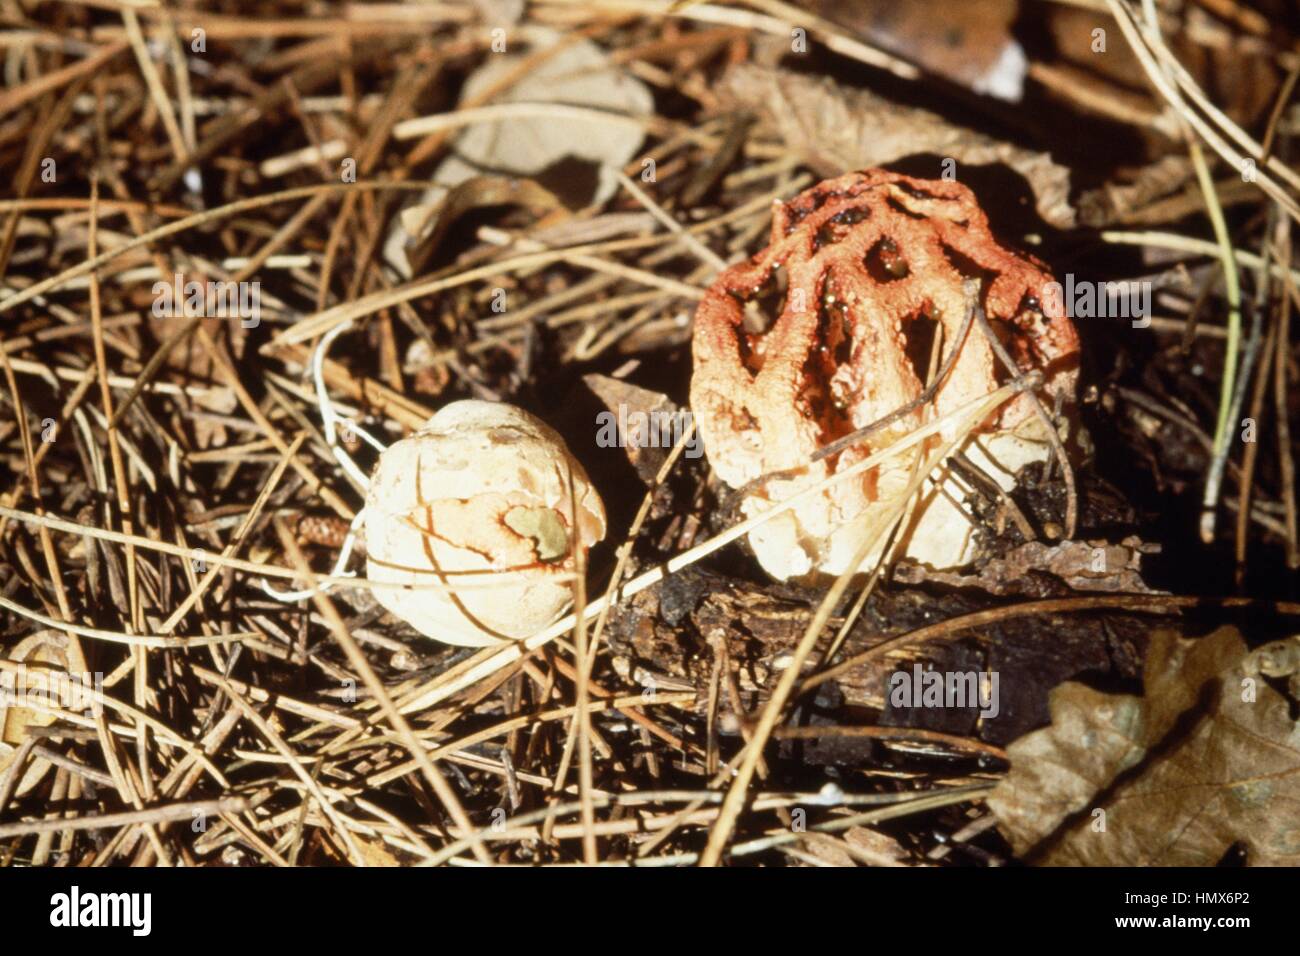 Example of a mature Latticed stinkhorn, Basket stinkhorn, Red cage (Clathrus cancellatus o Clathrus ruber), Clathraceae, and on the right an example of the egg stage. Stock Photo